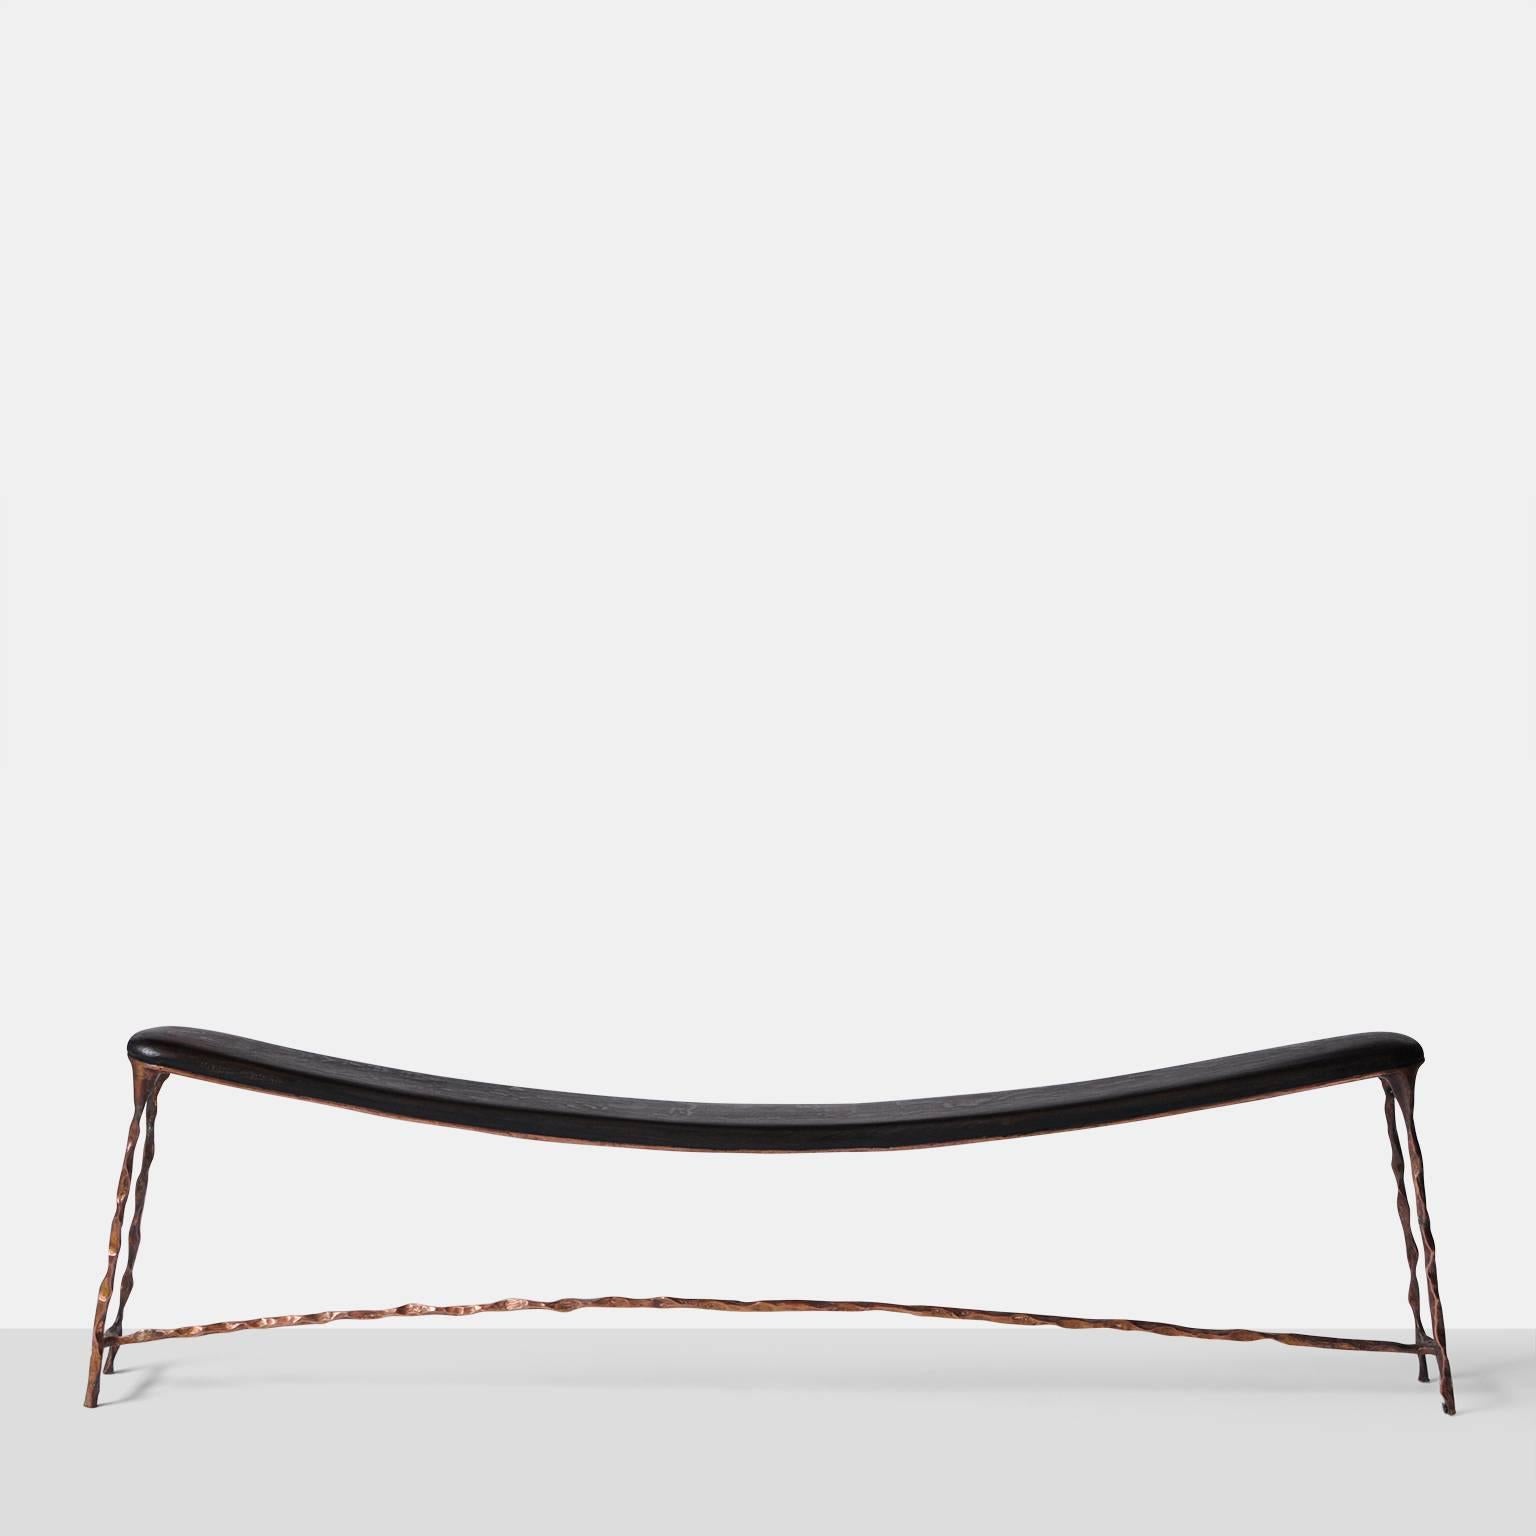 Dutch Large Bended Copper Bench by Valentin Loellmann